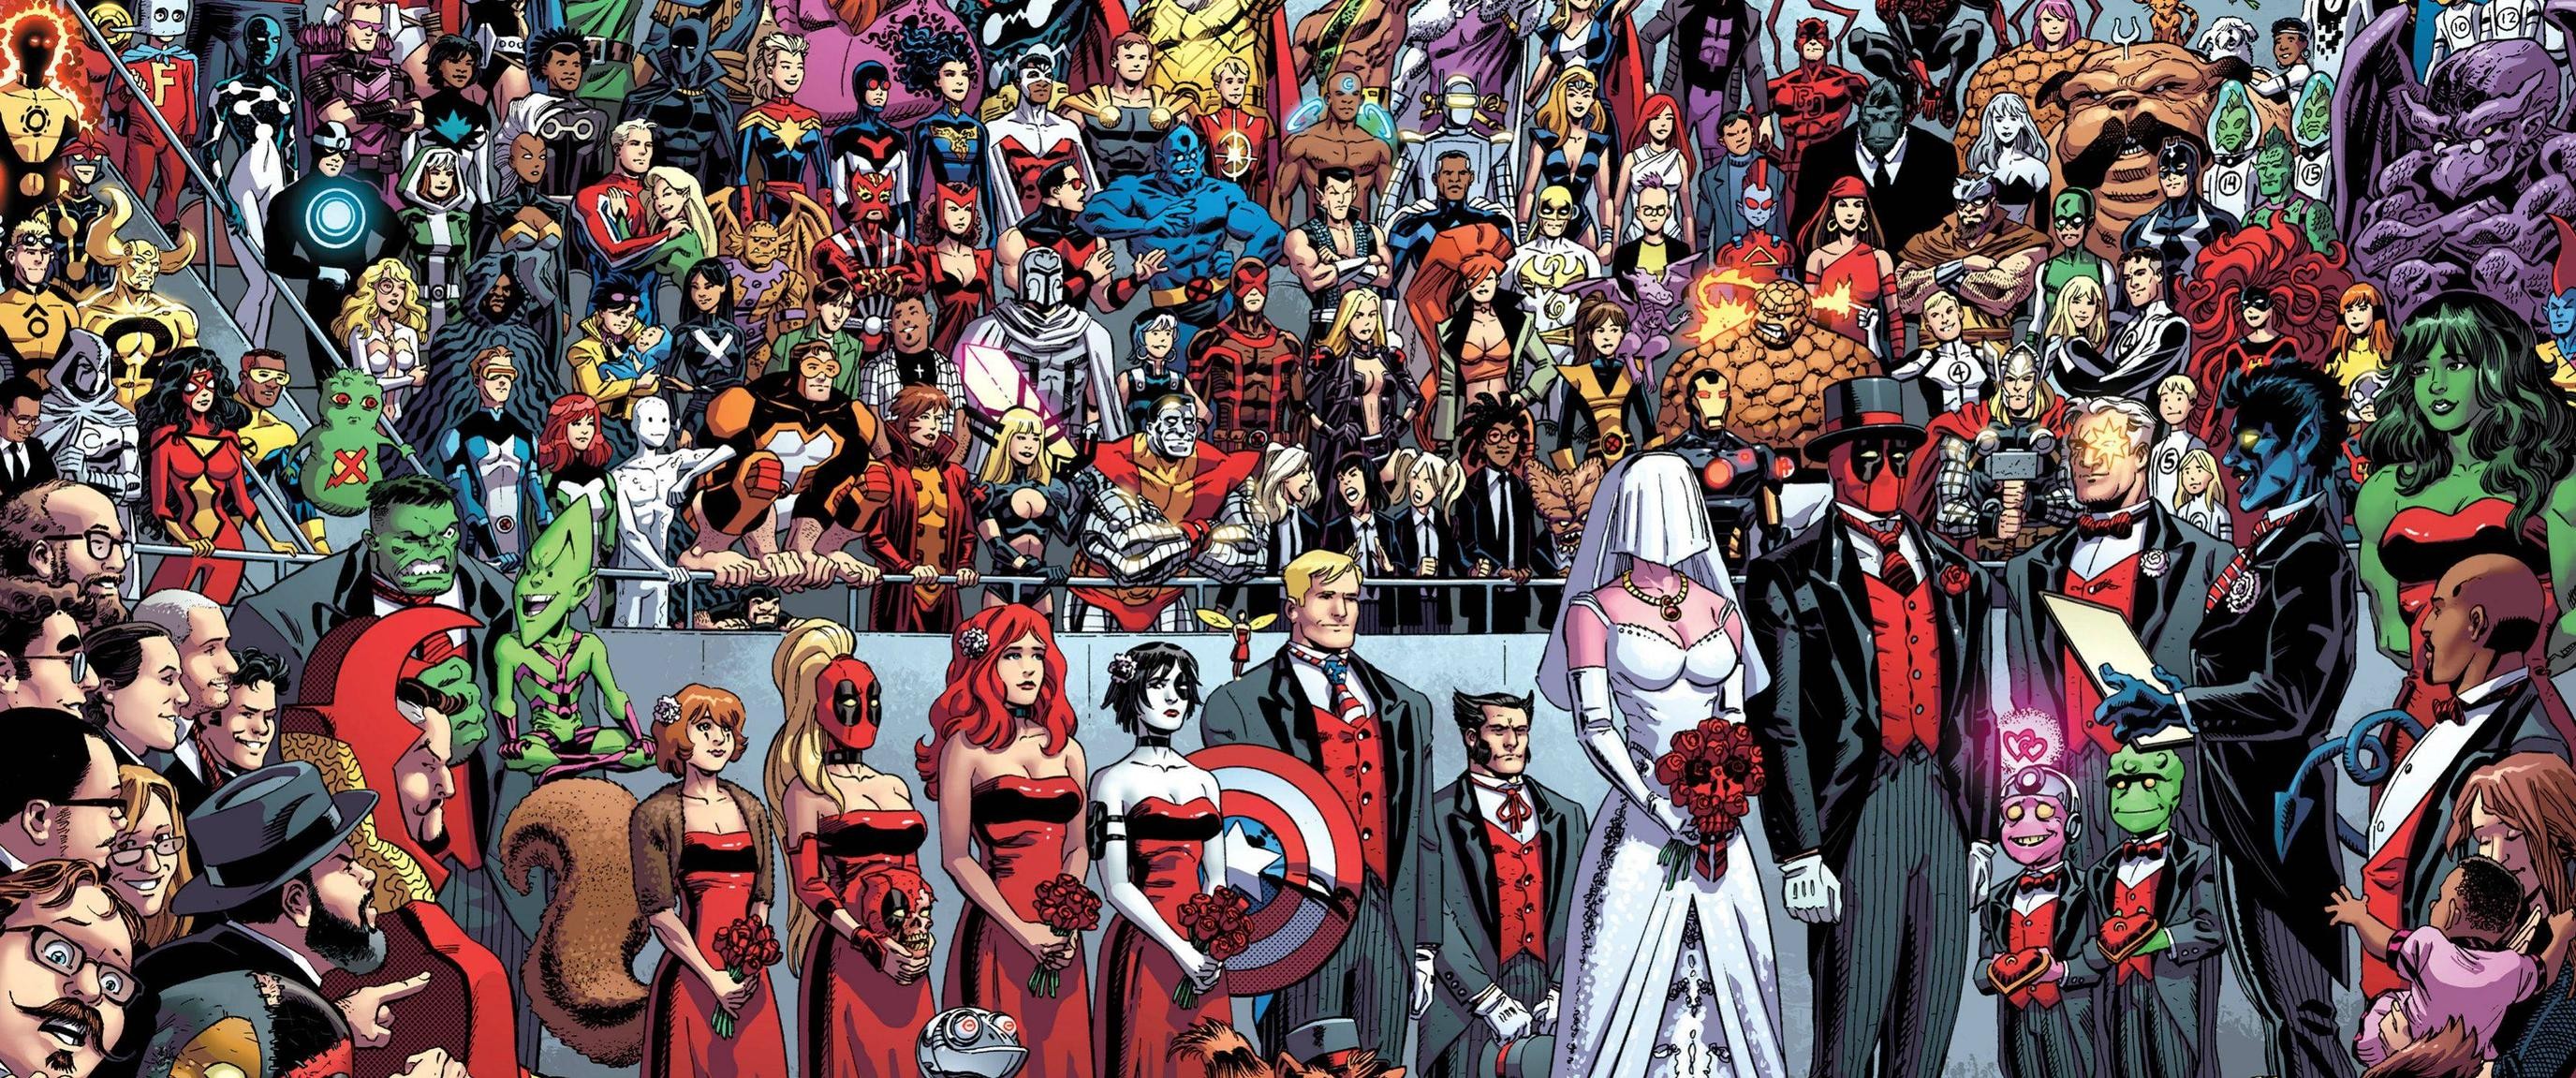 General 2751x1151 Marvel Comics Deadpool marriage superhero Wolverine Captain America Domino (Neena Thurman) Hulk Cable Nightcrawler She-Hulk Thor Colossus Cyclops Emma Frost Magneto Scarlet Witch Namor Elektra Natchios Captain Marvel Spider-Woman Moon Knight Doctor Strange Storm (character) Rogue Black Panther Jean Grey Beast (character) Thing Human Torch Invisible Woman Mr. Fantastic Daredevil Iron Man Hawkeye Jubilee Iron Fist Kitty Pryde comic art comics